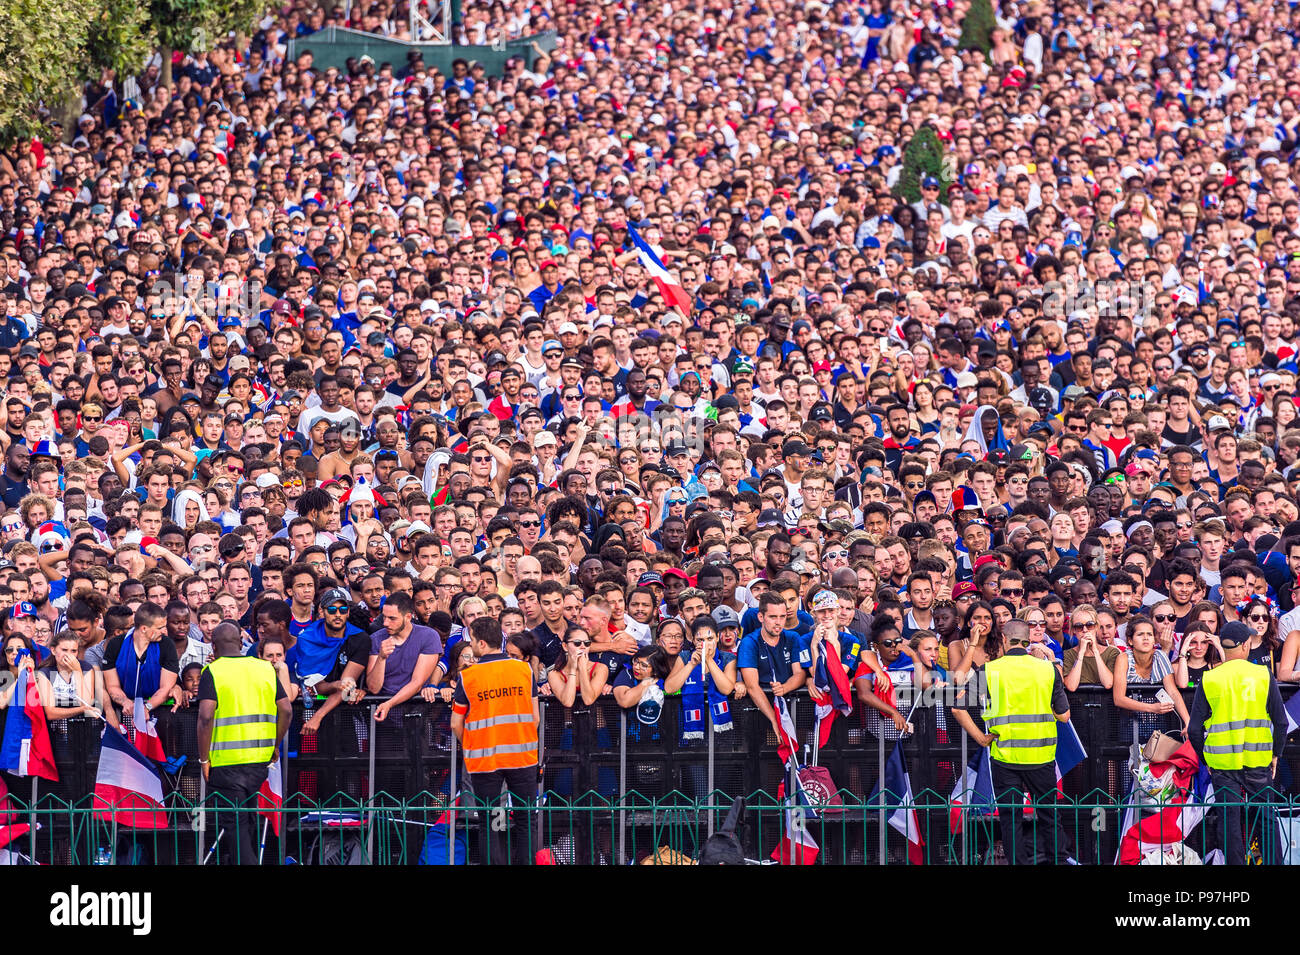 Paris, France. 15th July, 2018. Large crowds turn out in Paris to watch  France win the World Cup. Paris, France. Credit: Samantha Ohlsen/Alamy Live  News Stock Photo - Alamy